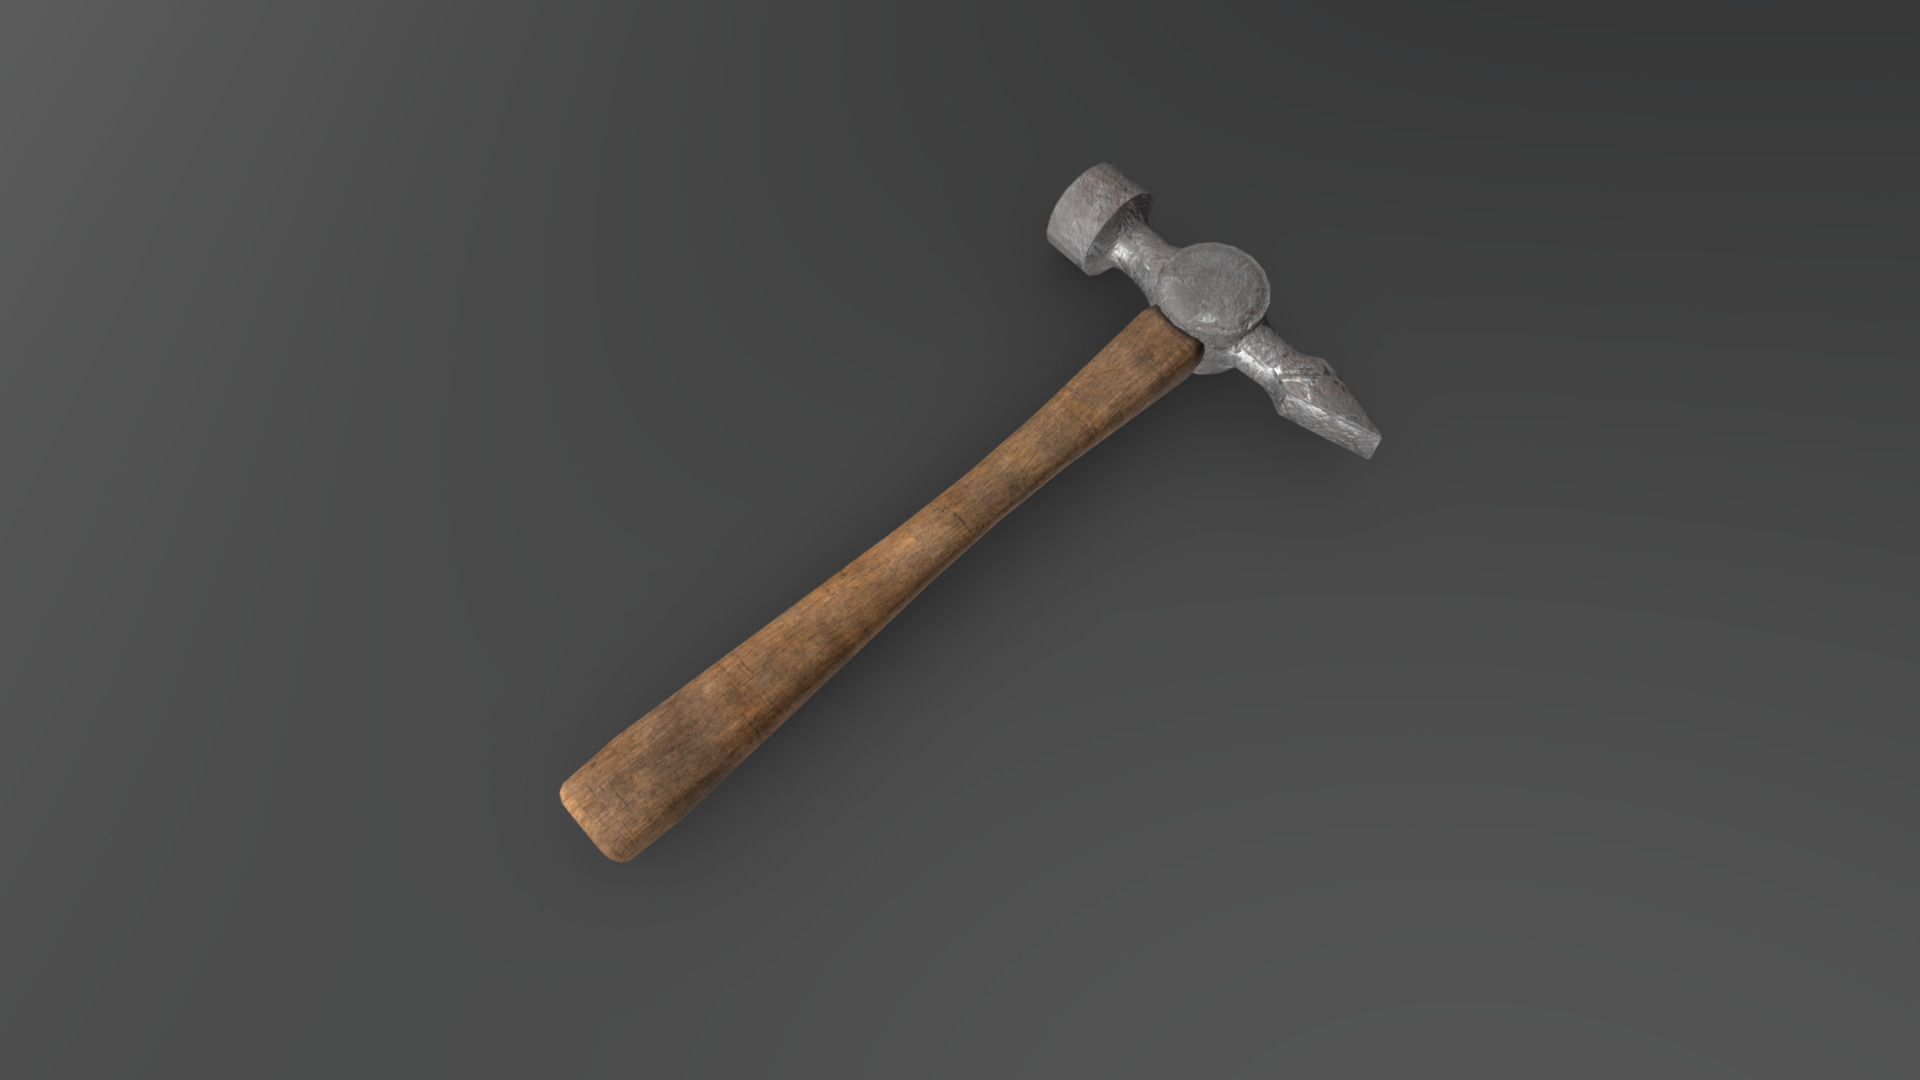 3D model Vintage carpentry Hammer - This is a 3D model of the Vintage carpentry Hammer. The 3D model is about a wooden hammer on a grey background.